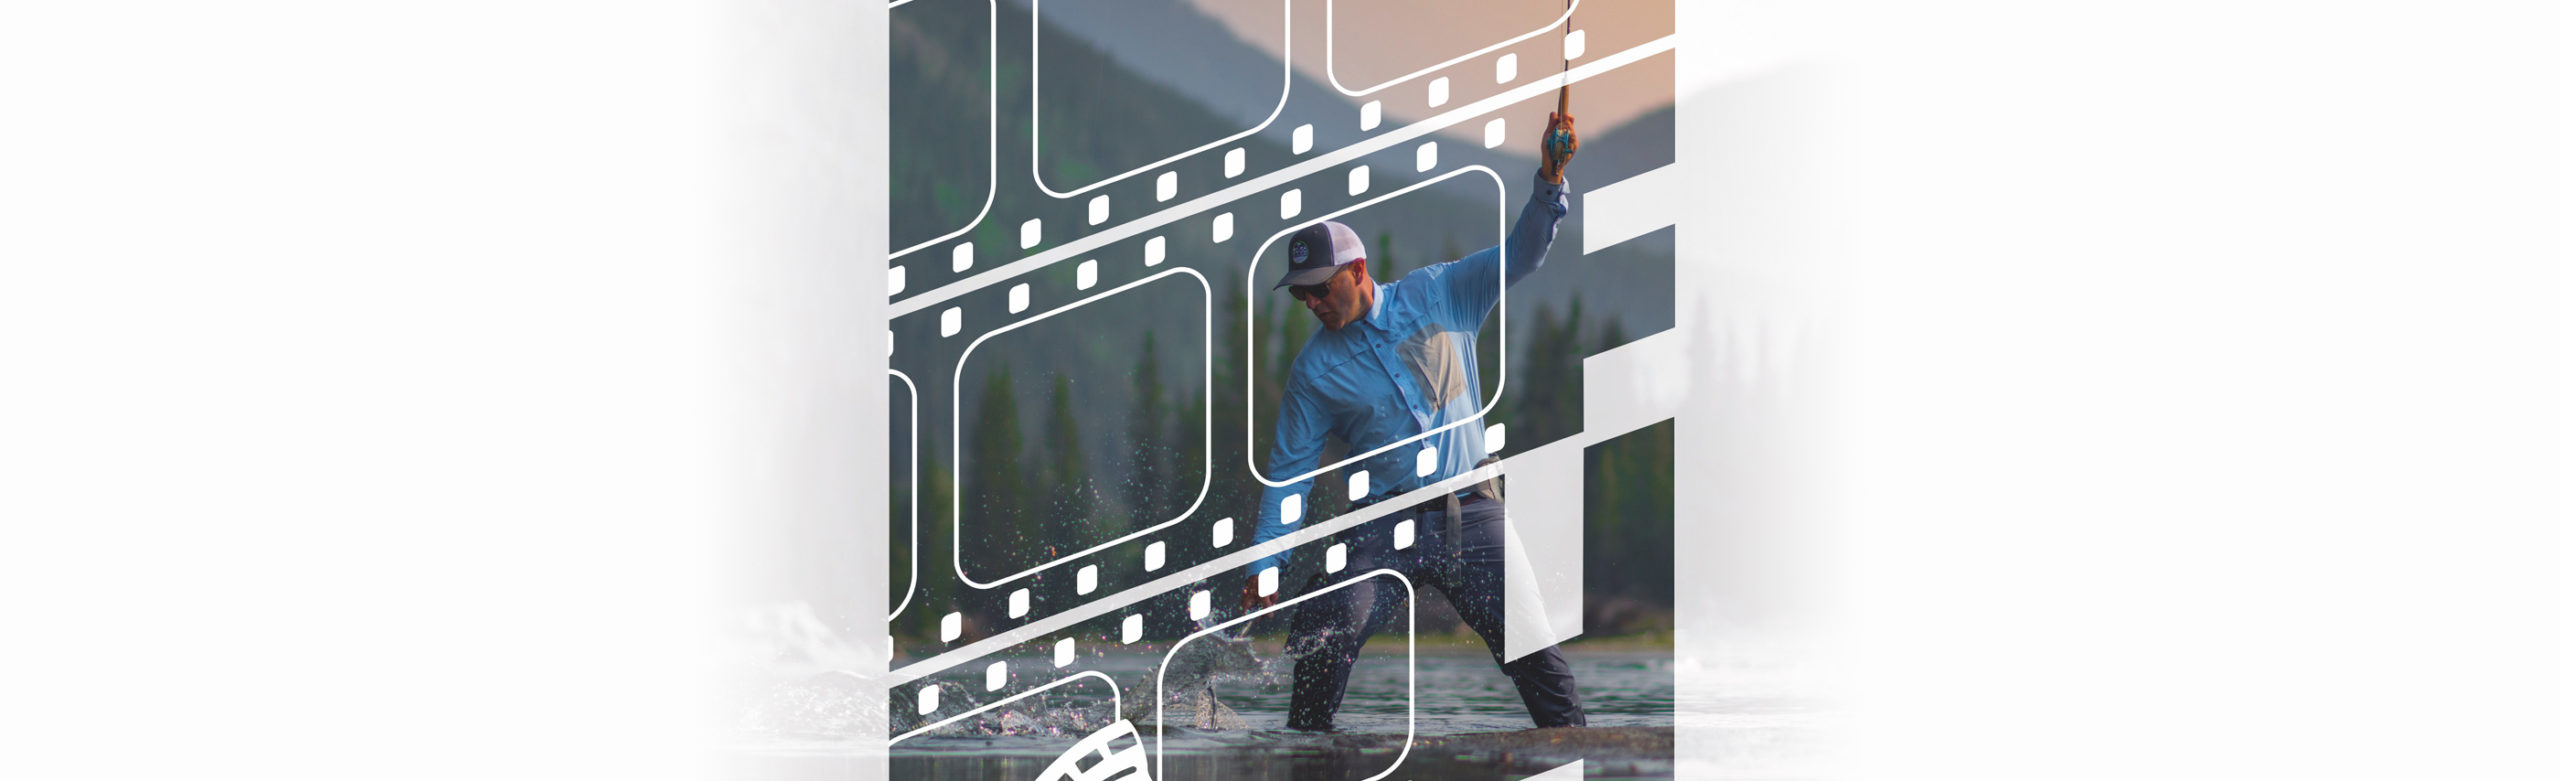 Event Info: International Fly Fishing Film Festival at the Wilma 2019 Image